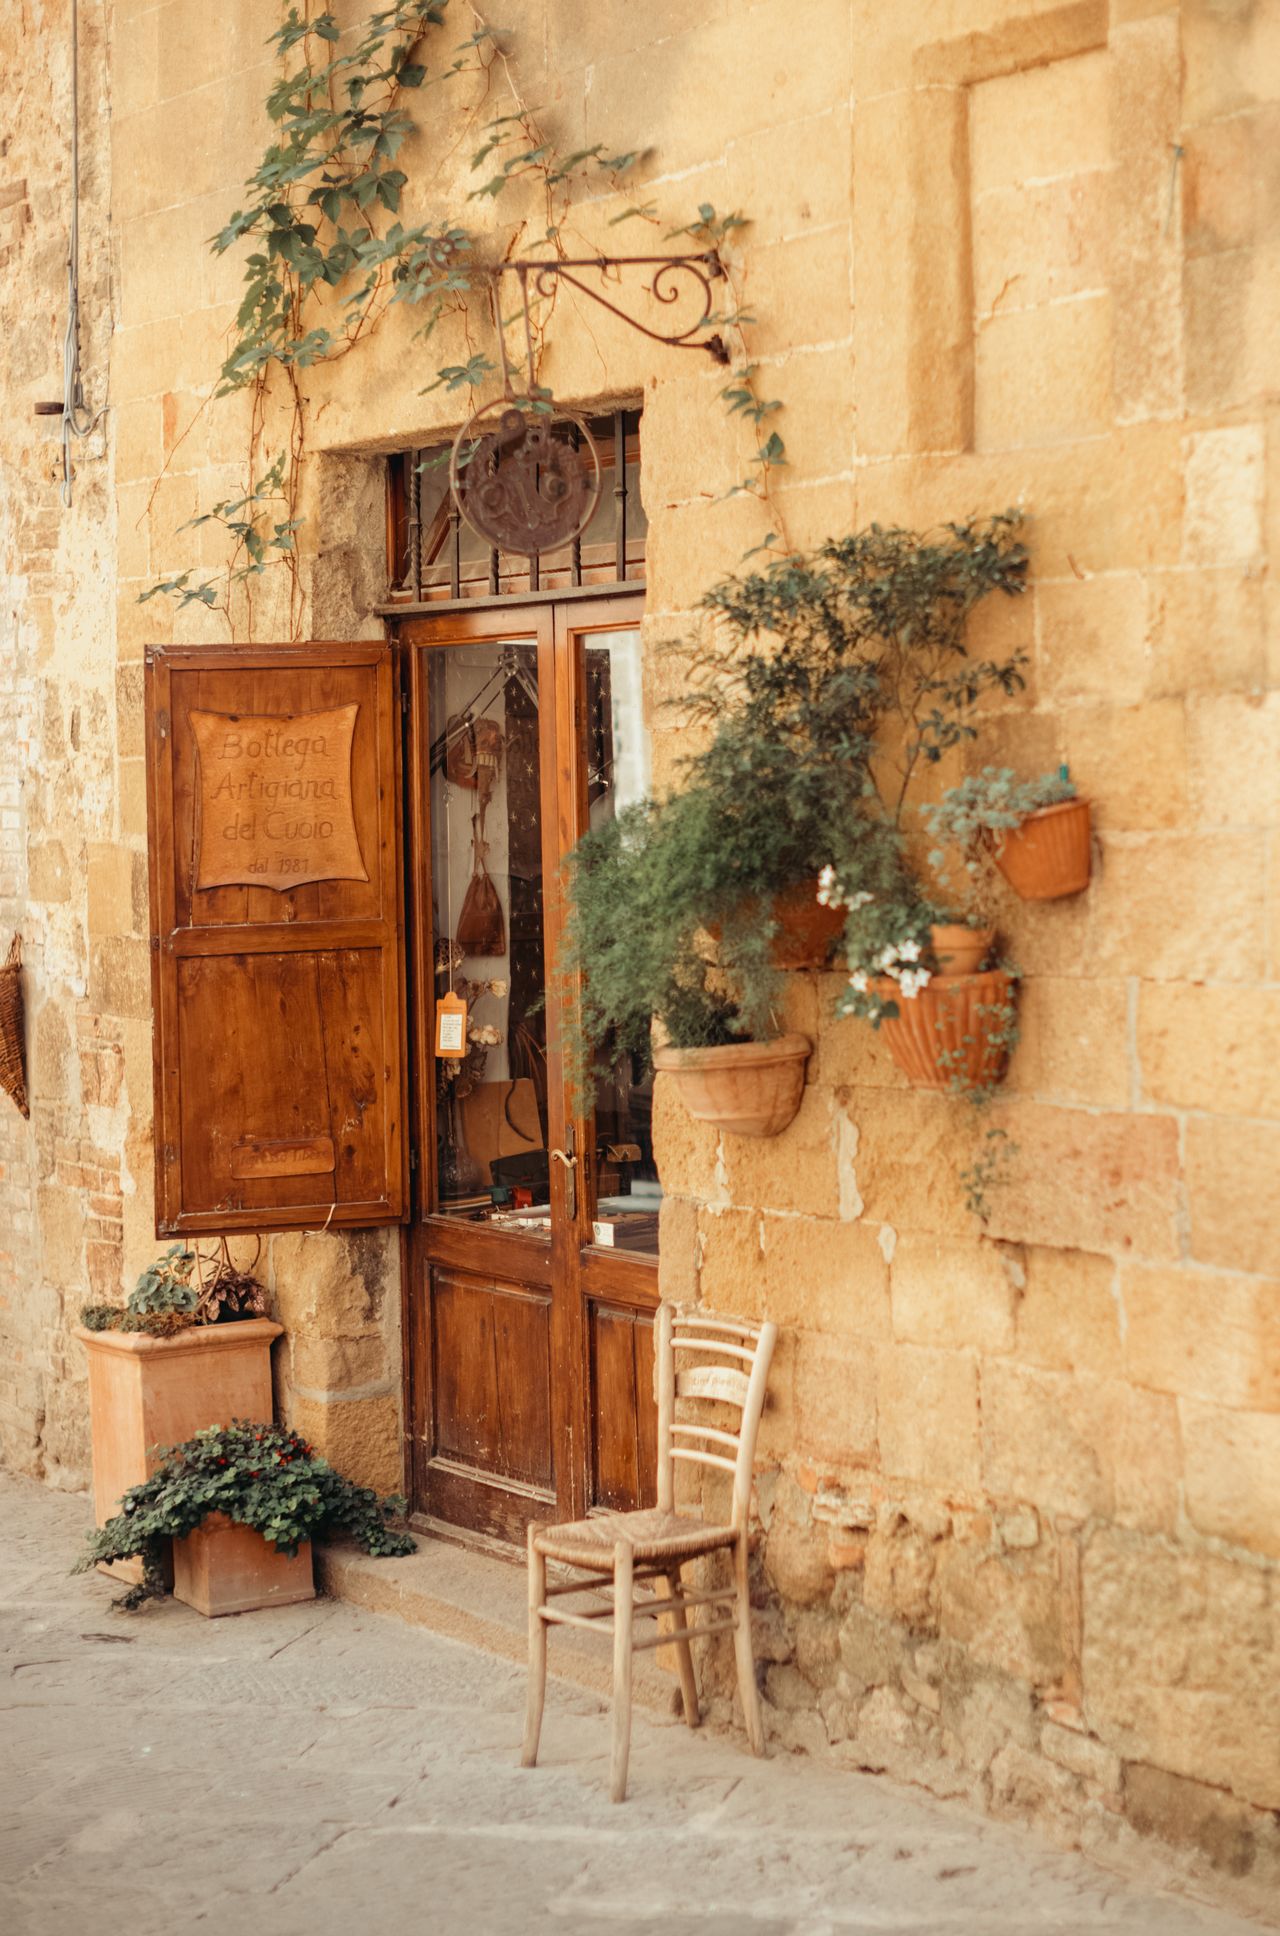 The yellows of pienza